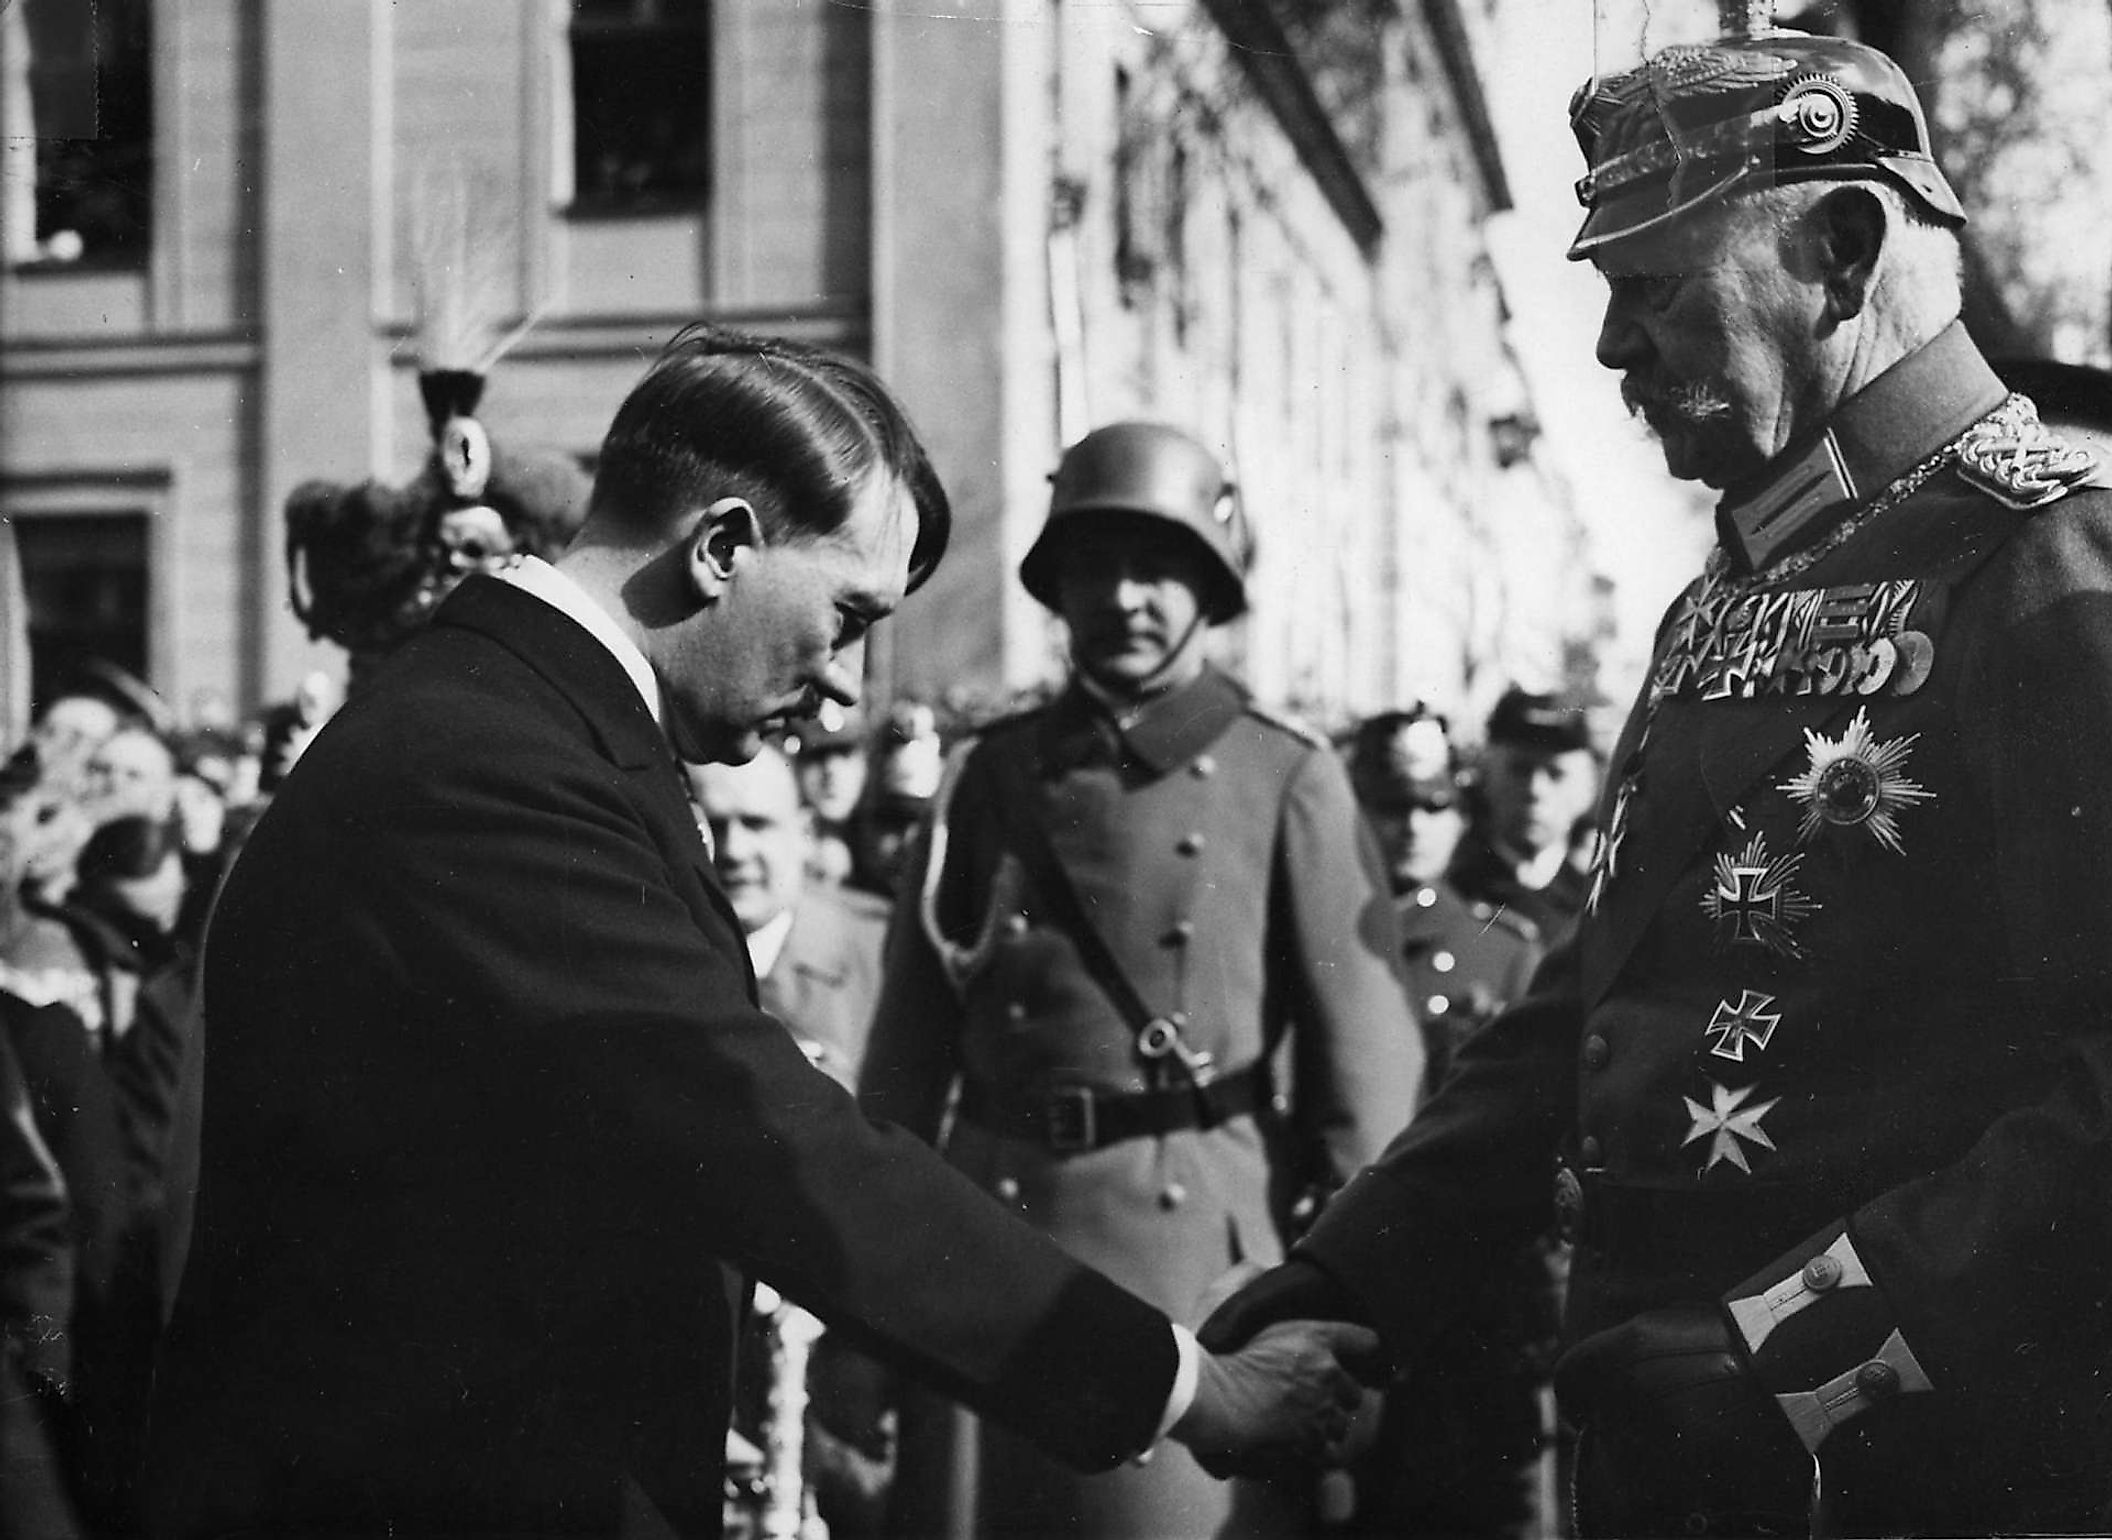 Hitler and Paul von Hindenburg on the Day of Potsdam, 21 March 1933